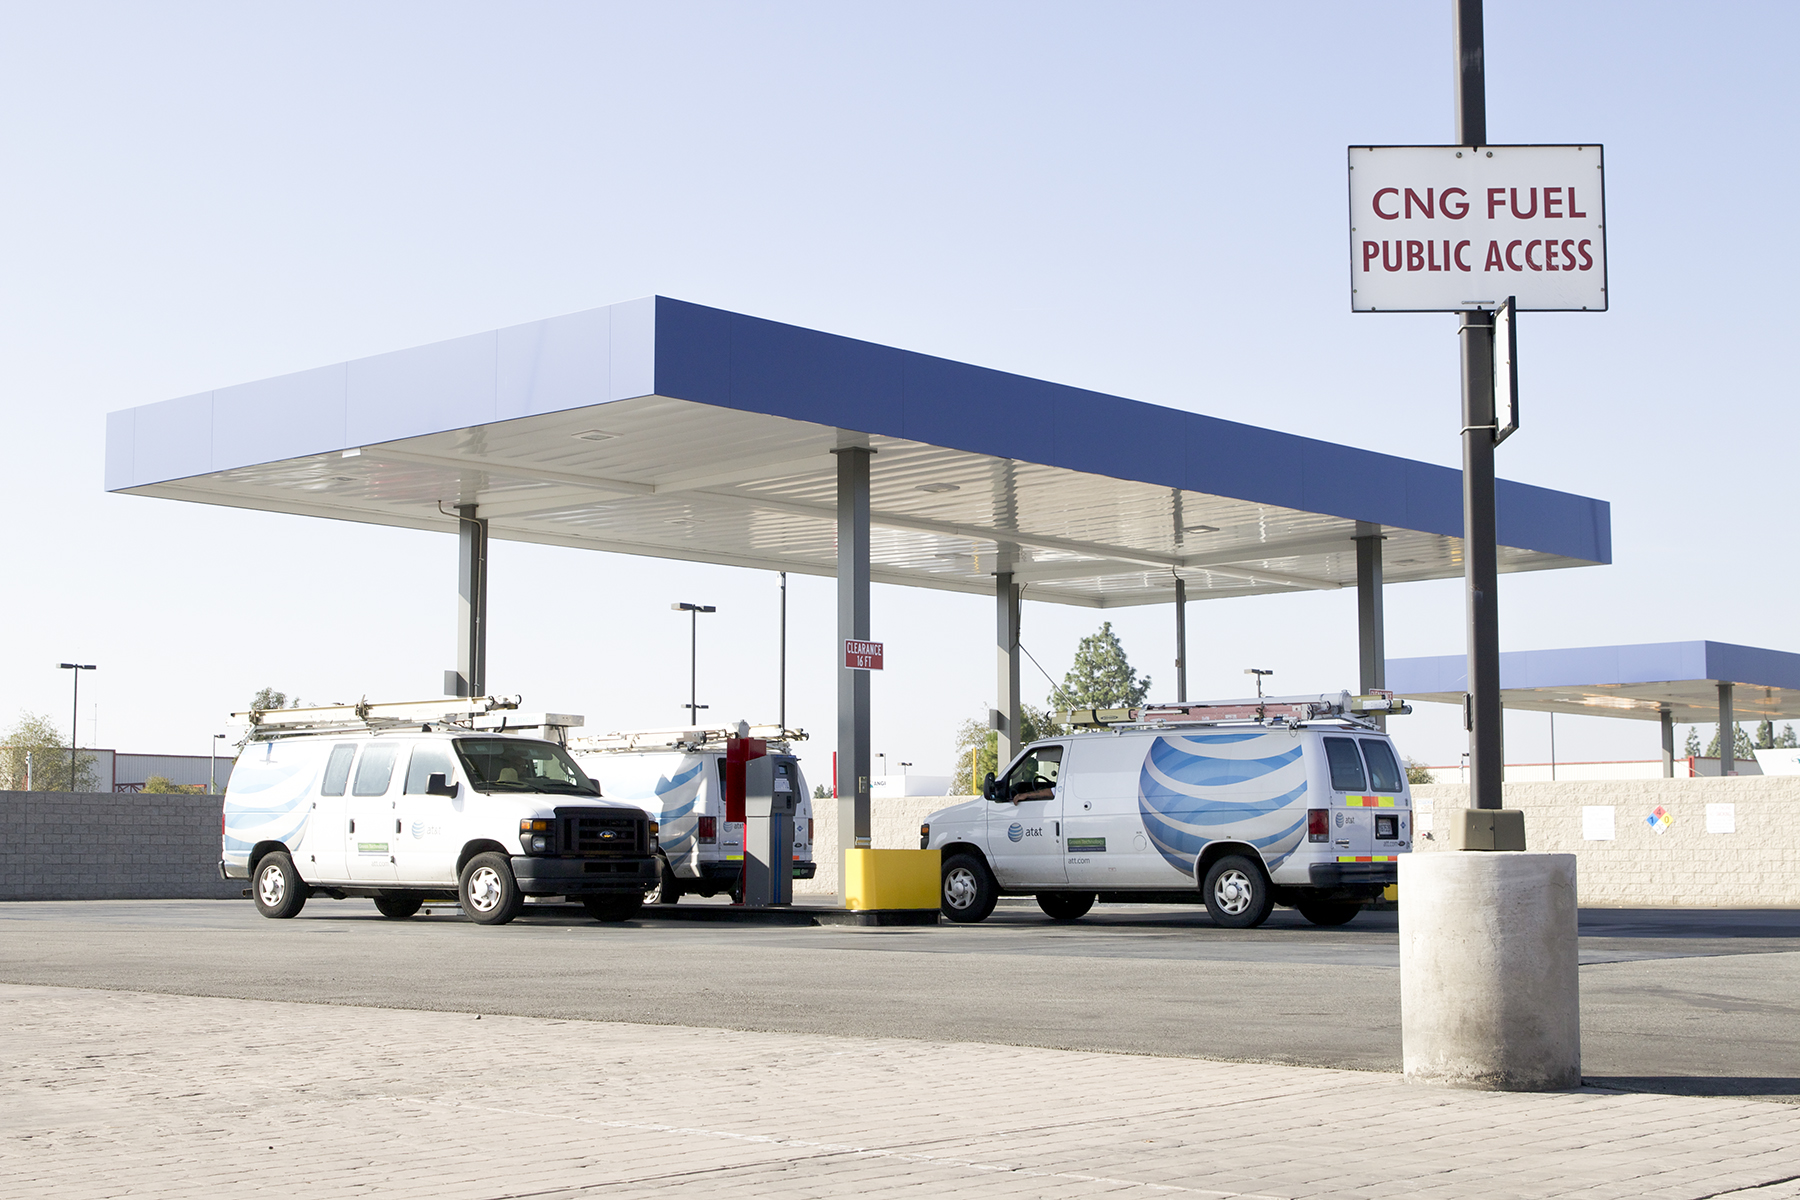 CNG1